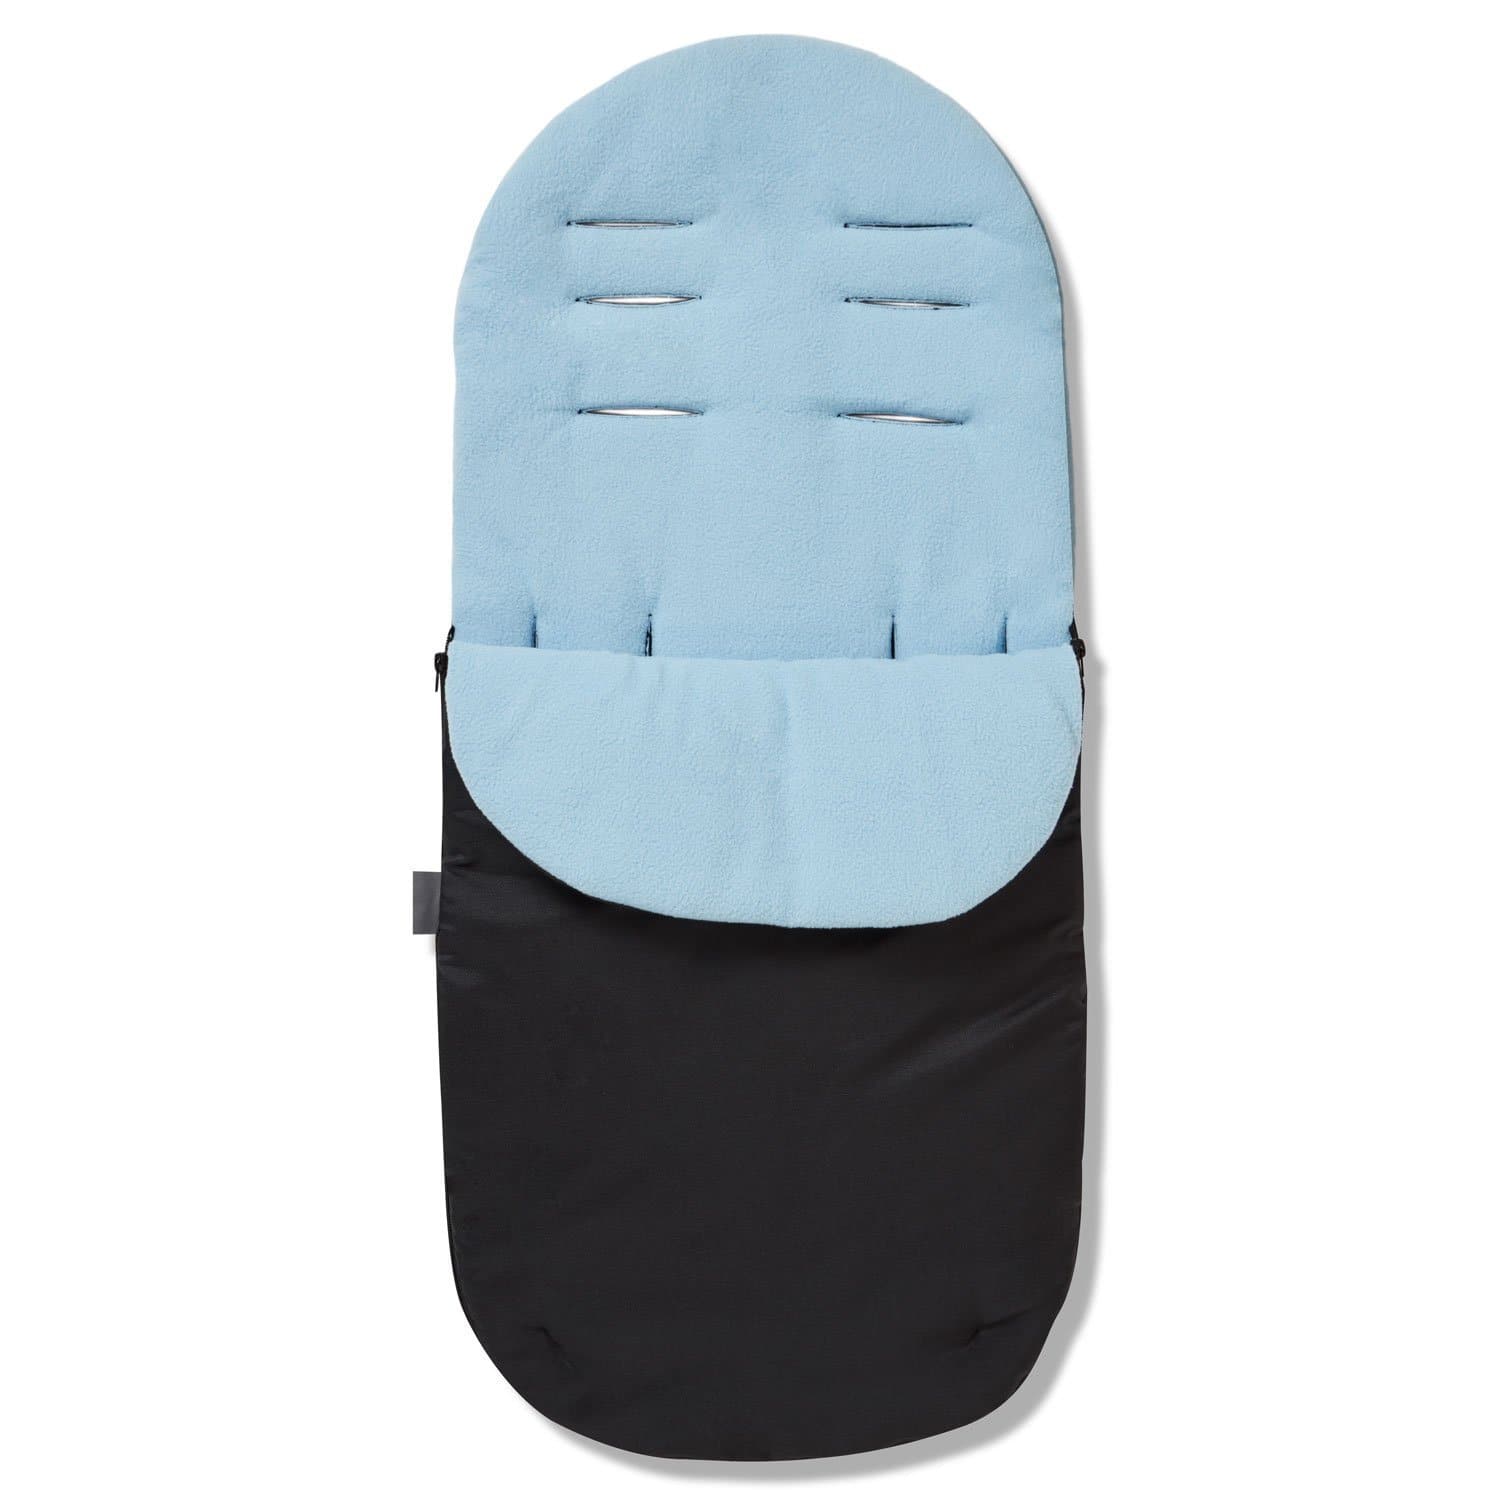 Footmuff / Cosy Toes Compatible with Noukies - Light Blue / Fits All Models | For Your Little One